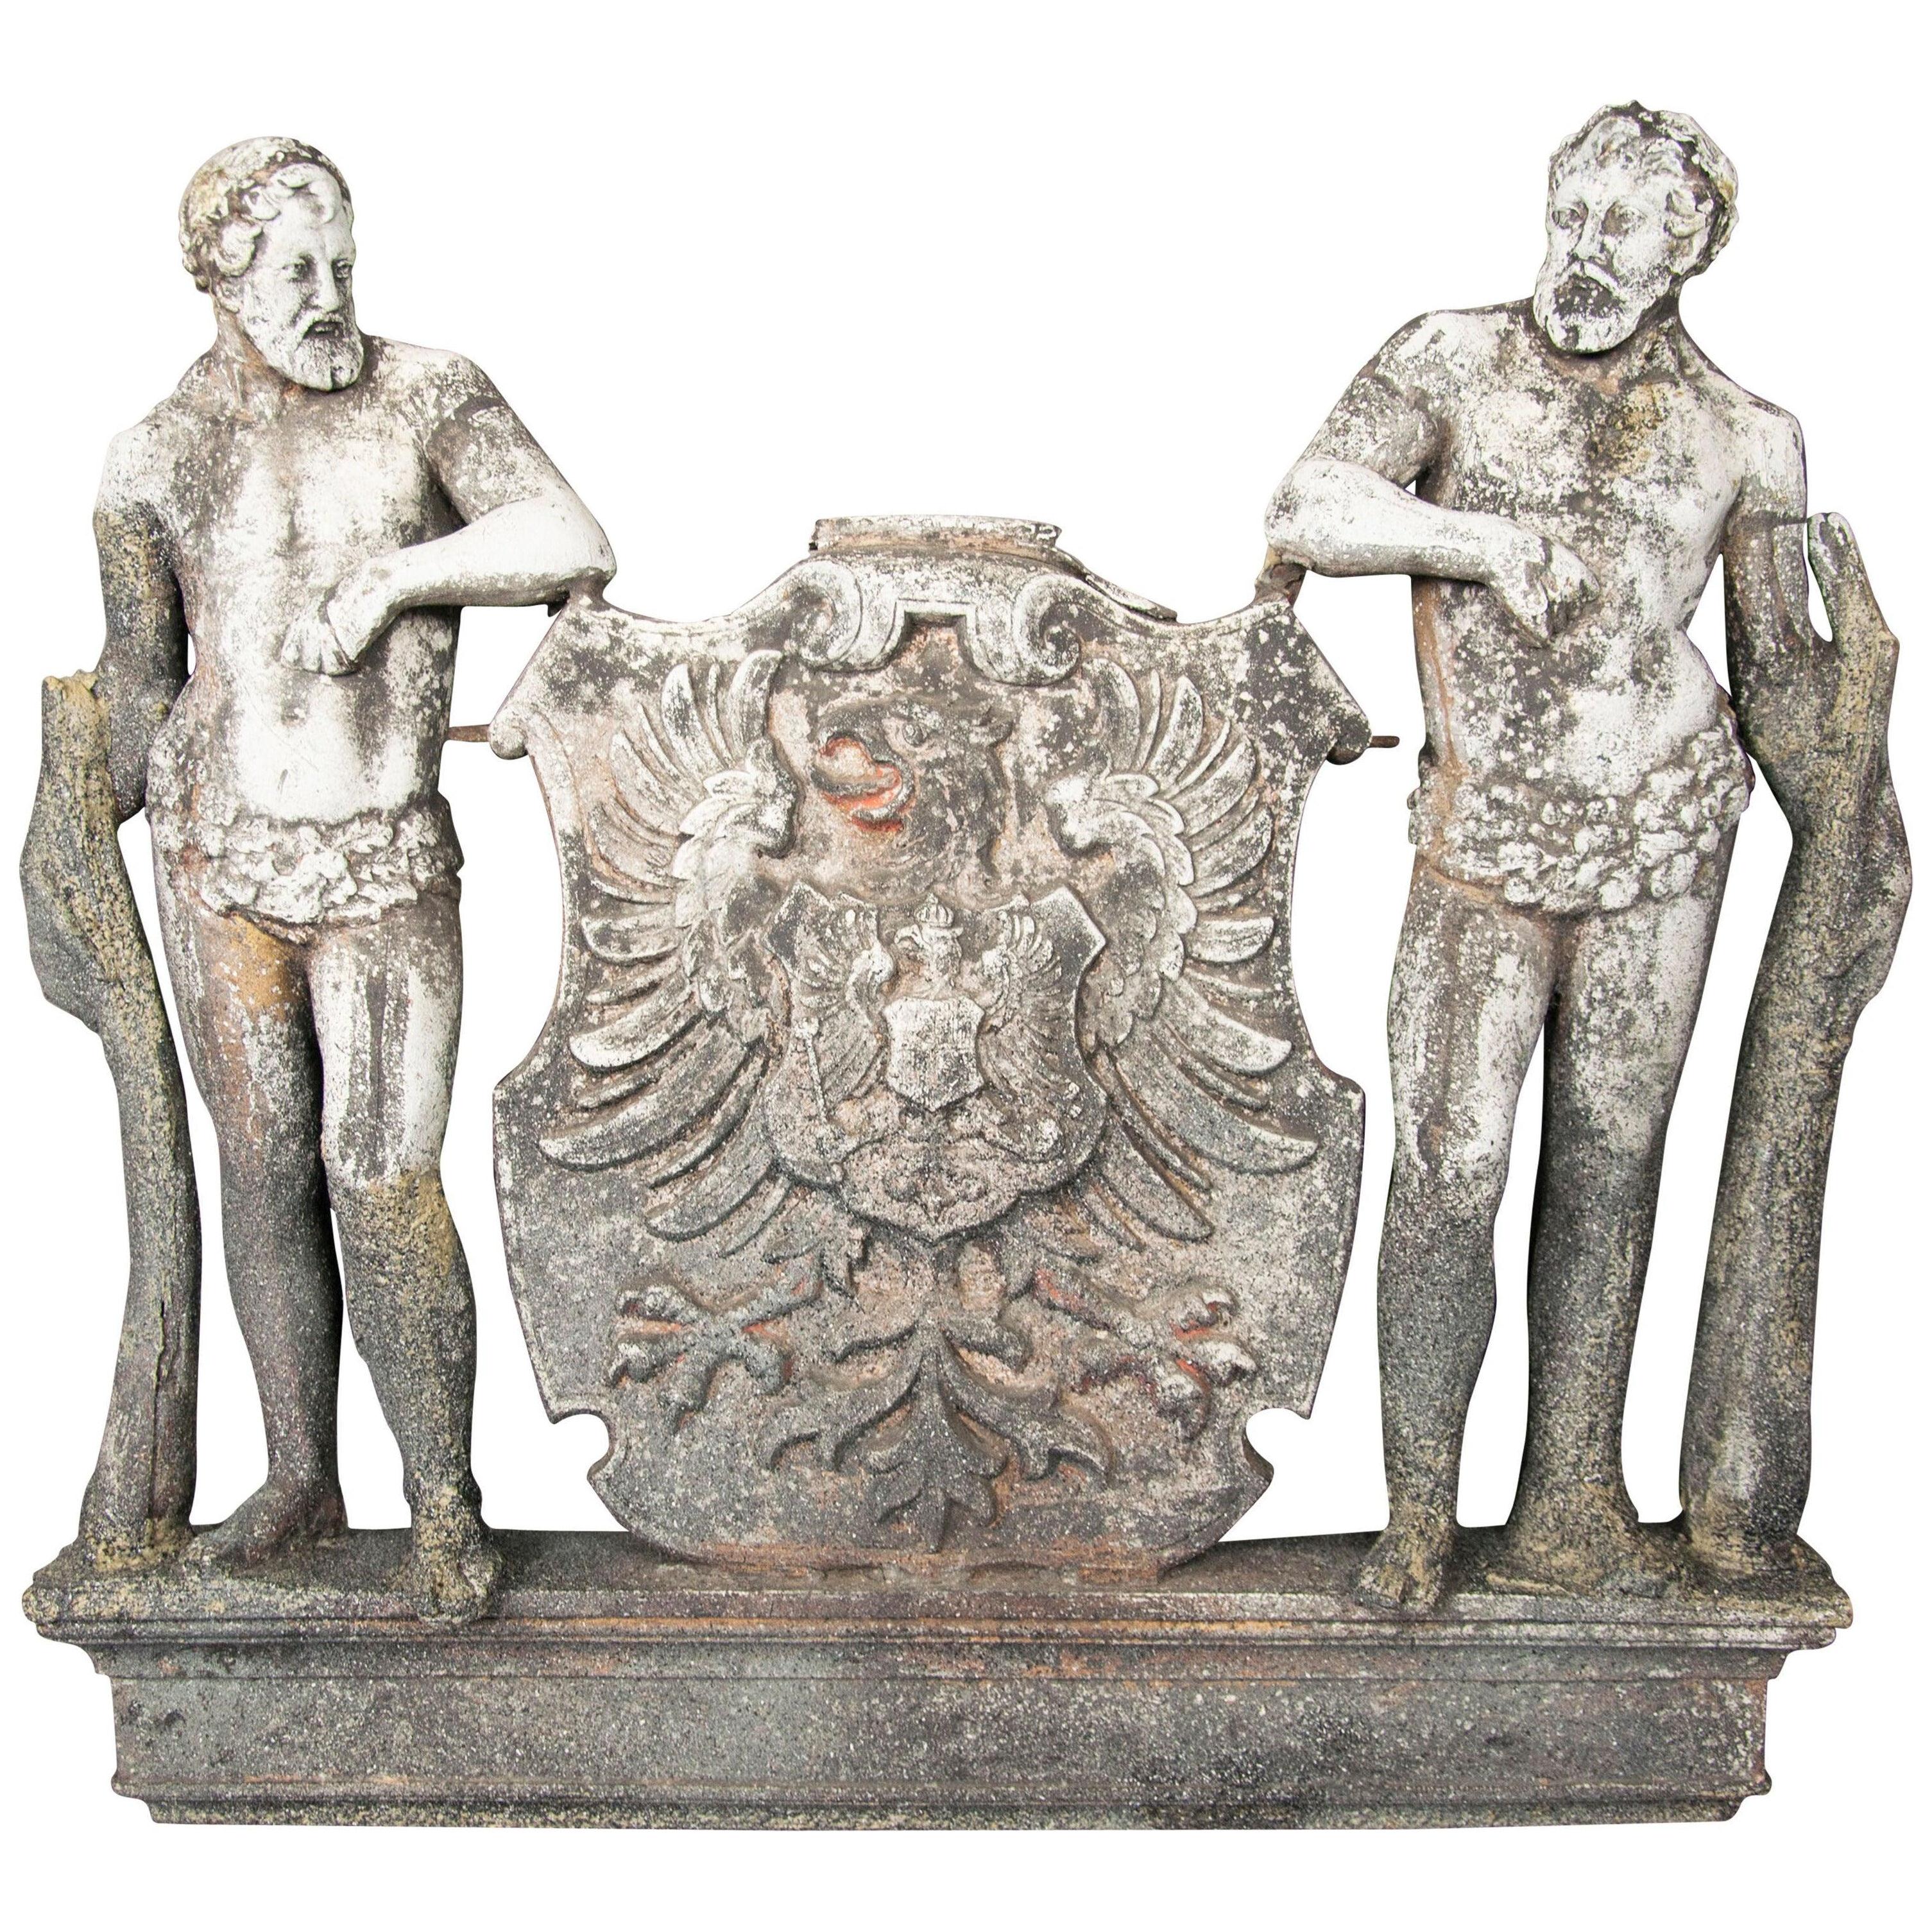 Cast Zinc Crest Bearing the Arms of the German Empire With Two Herculean Figures